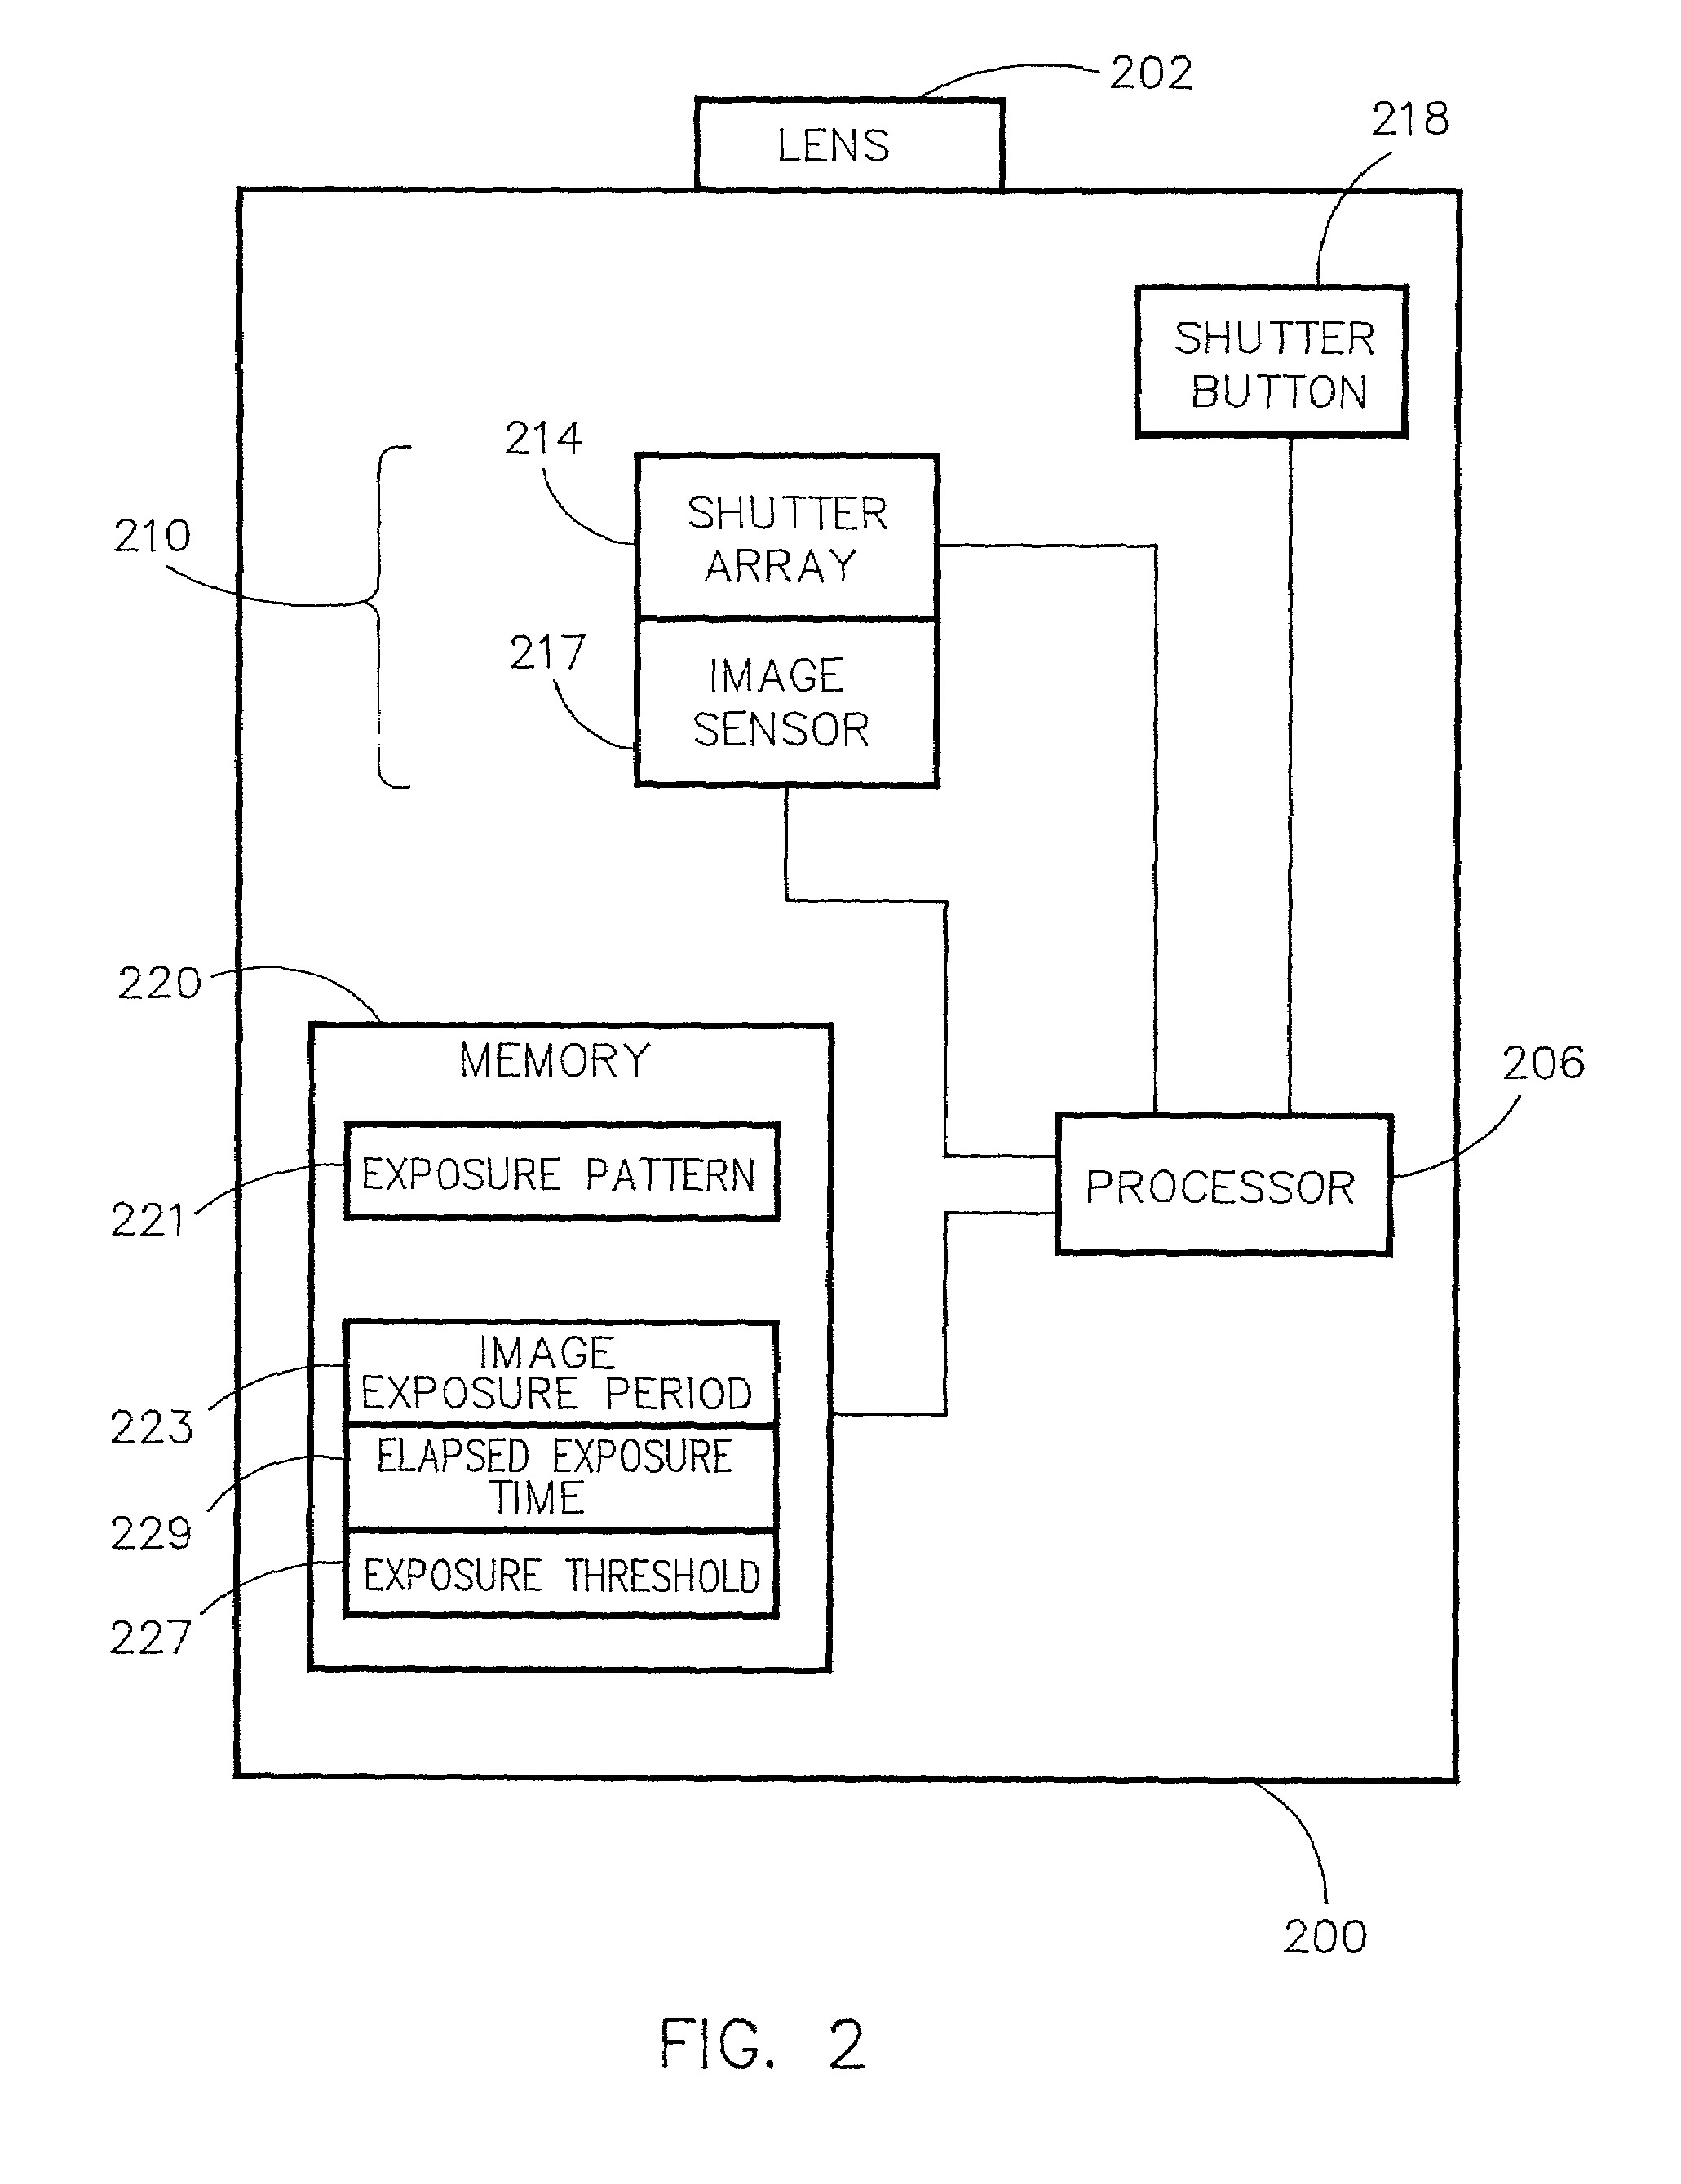 Image capturing device capable of single pixel exposure duration control